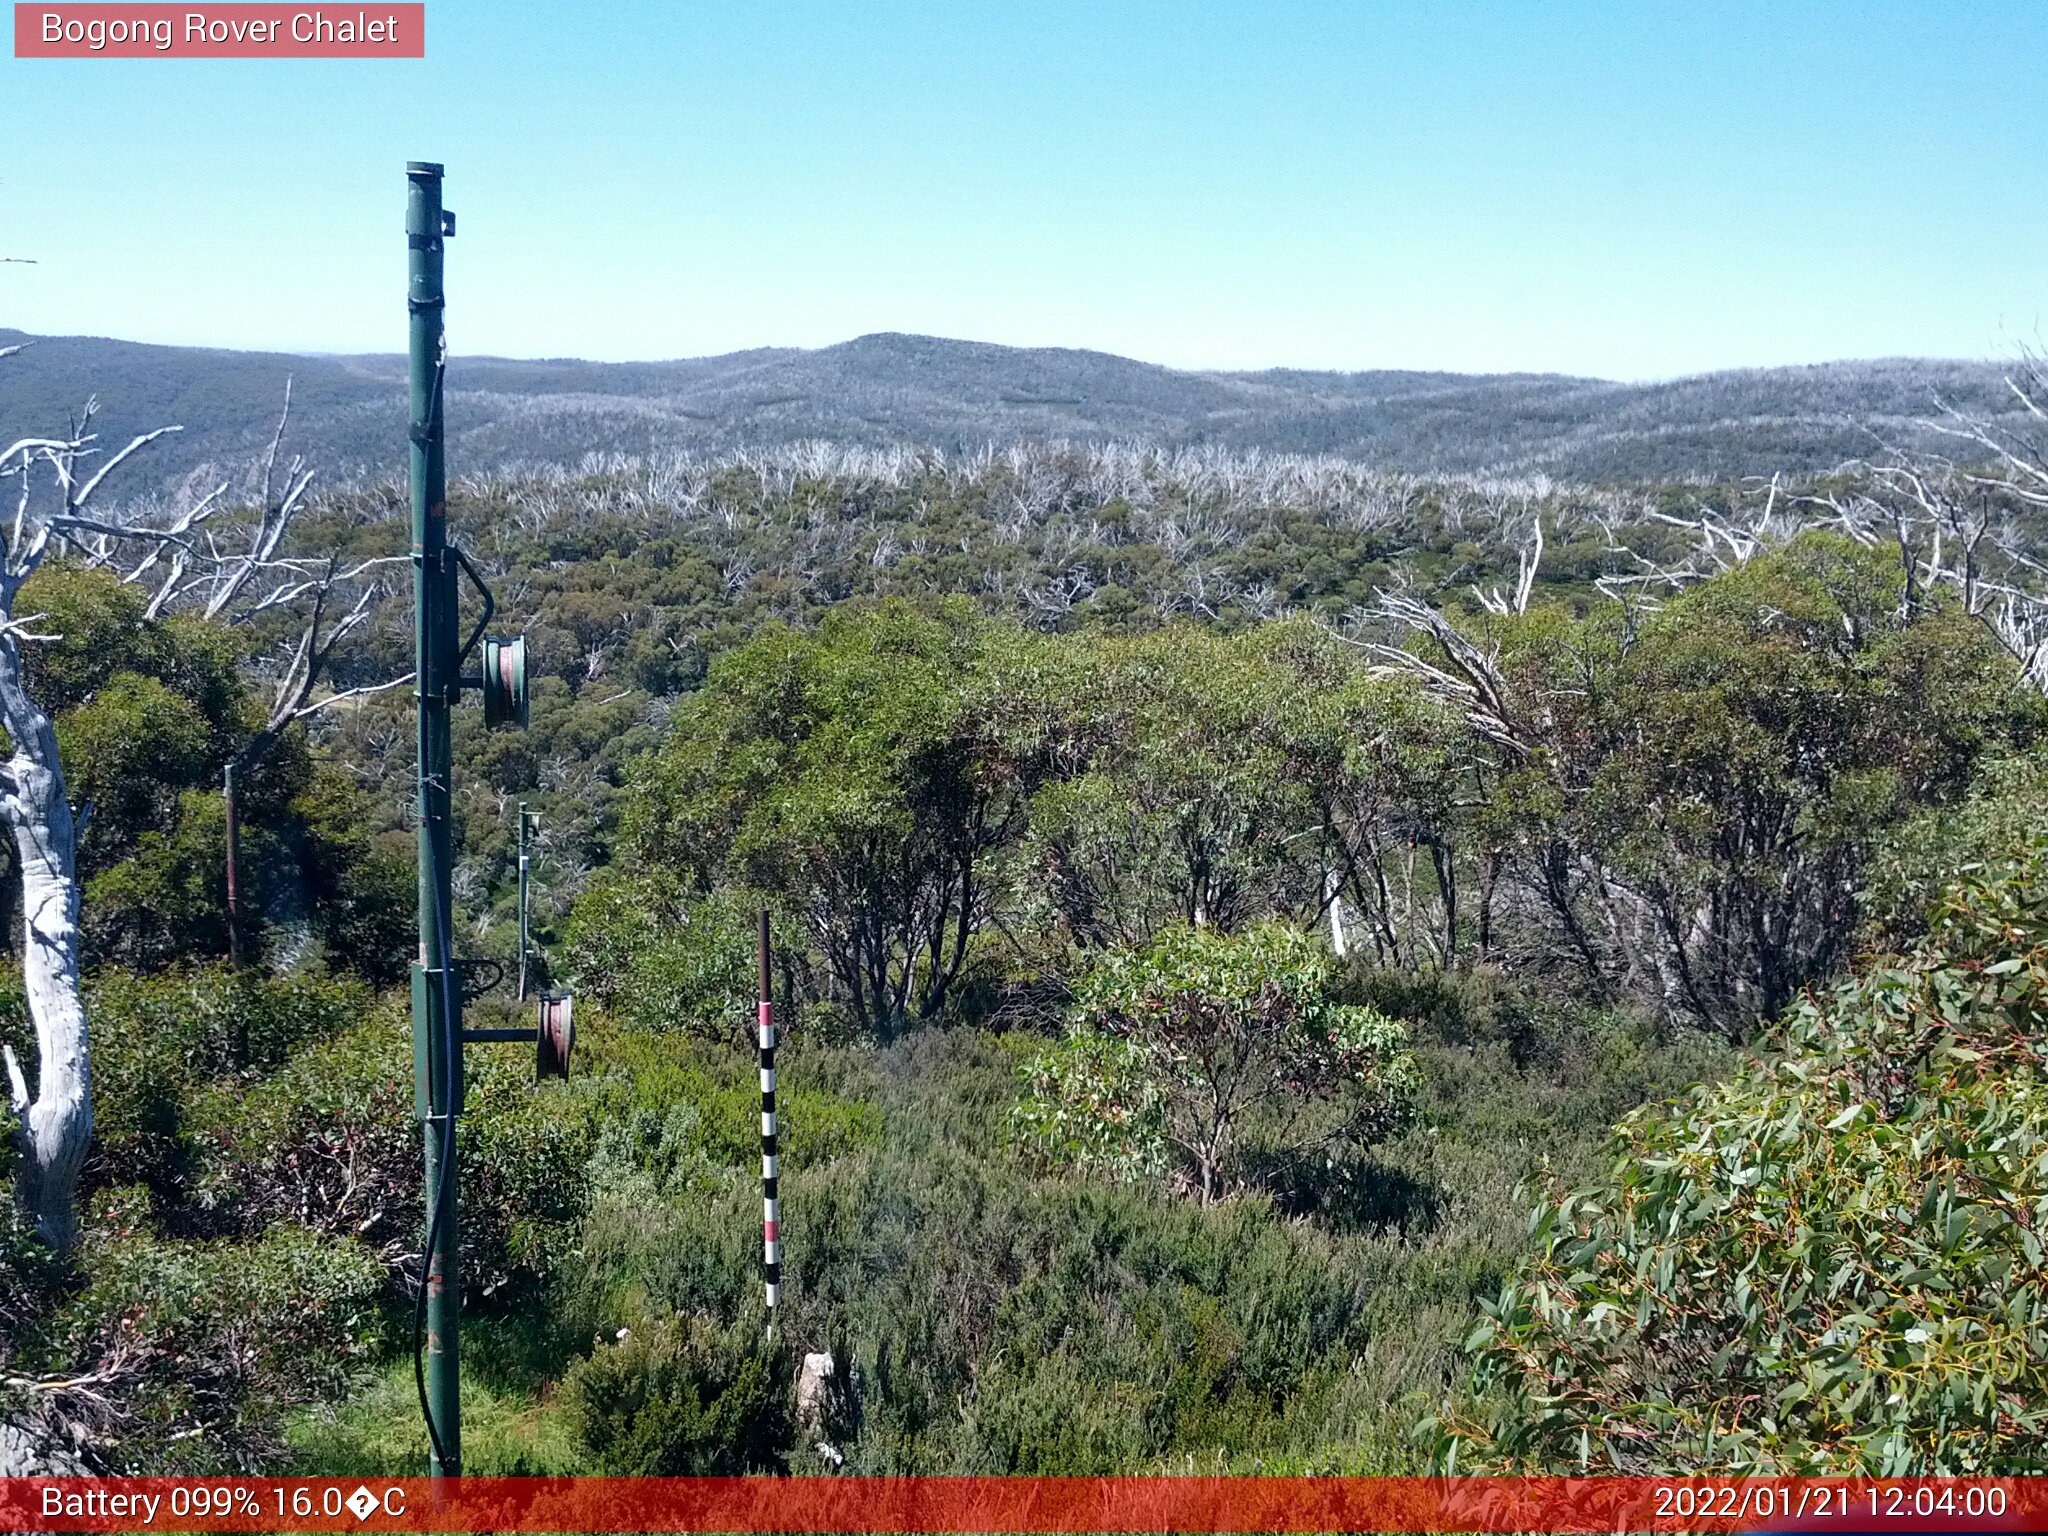 Bogong Web Cam 12:03pm Friday 21st of January 2022